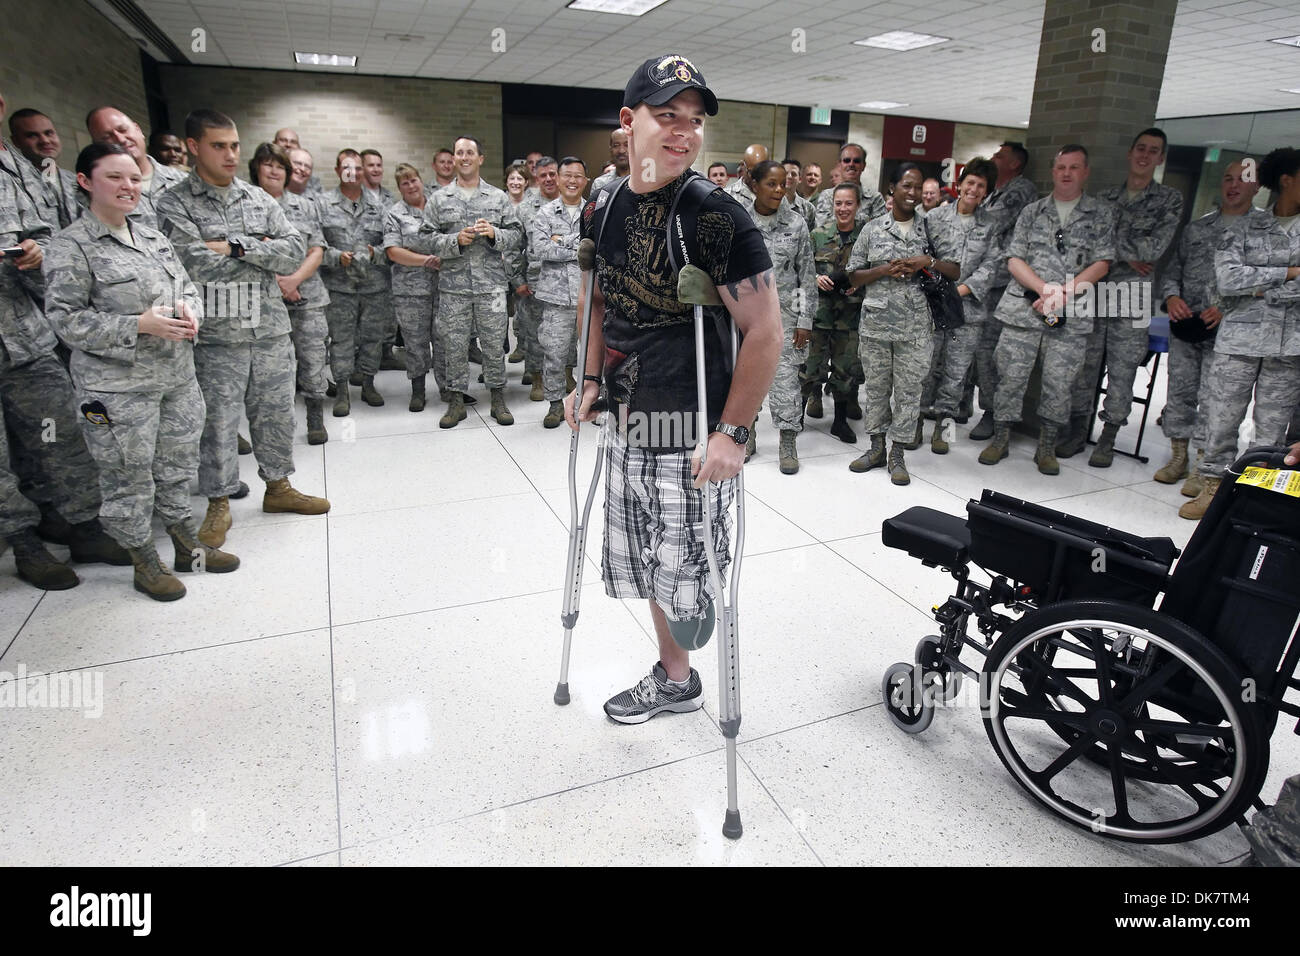 June 30, 2011 - Memphis, TN, U.S. - June 30, 2011 - Tennessee Air National Guard Staff Sergeant Russell Logan (middle) is greeted by several members of his 164th Airlift Wing Unit at the Memphis International Airport for his first trip home after losing the lower part of his left leg while stepping on a roadside bomb in Afghanistan on Motherâ€™s Day of  this year.  Logan who will r Stock Photo